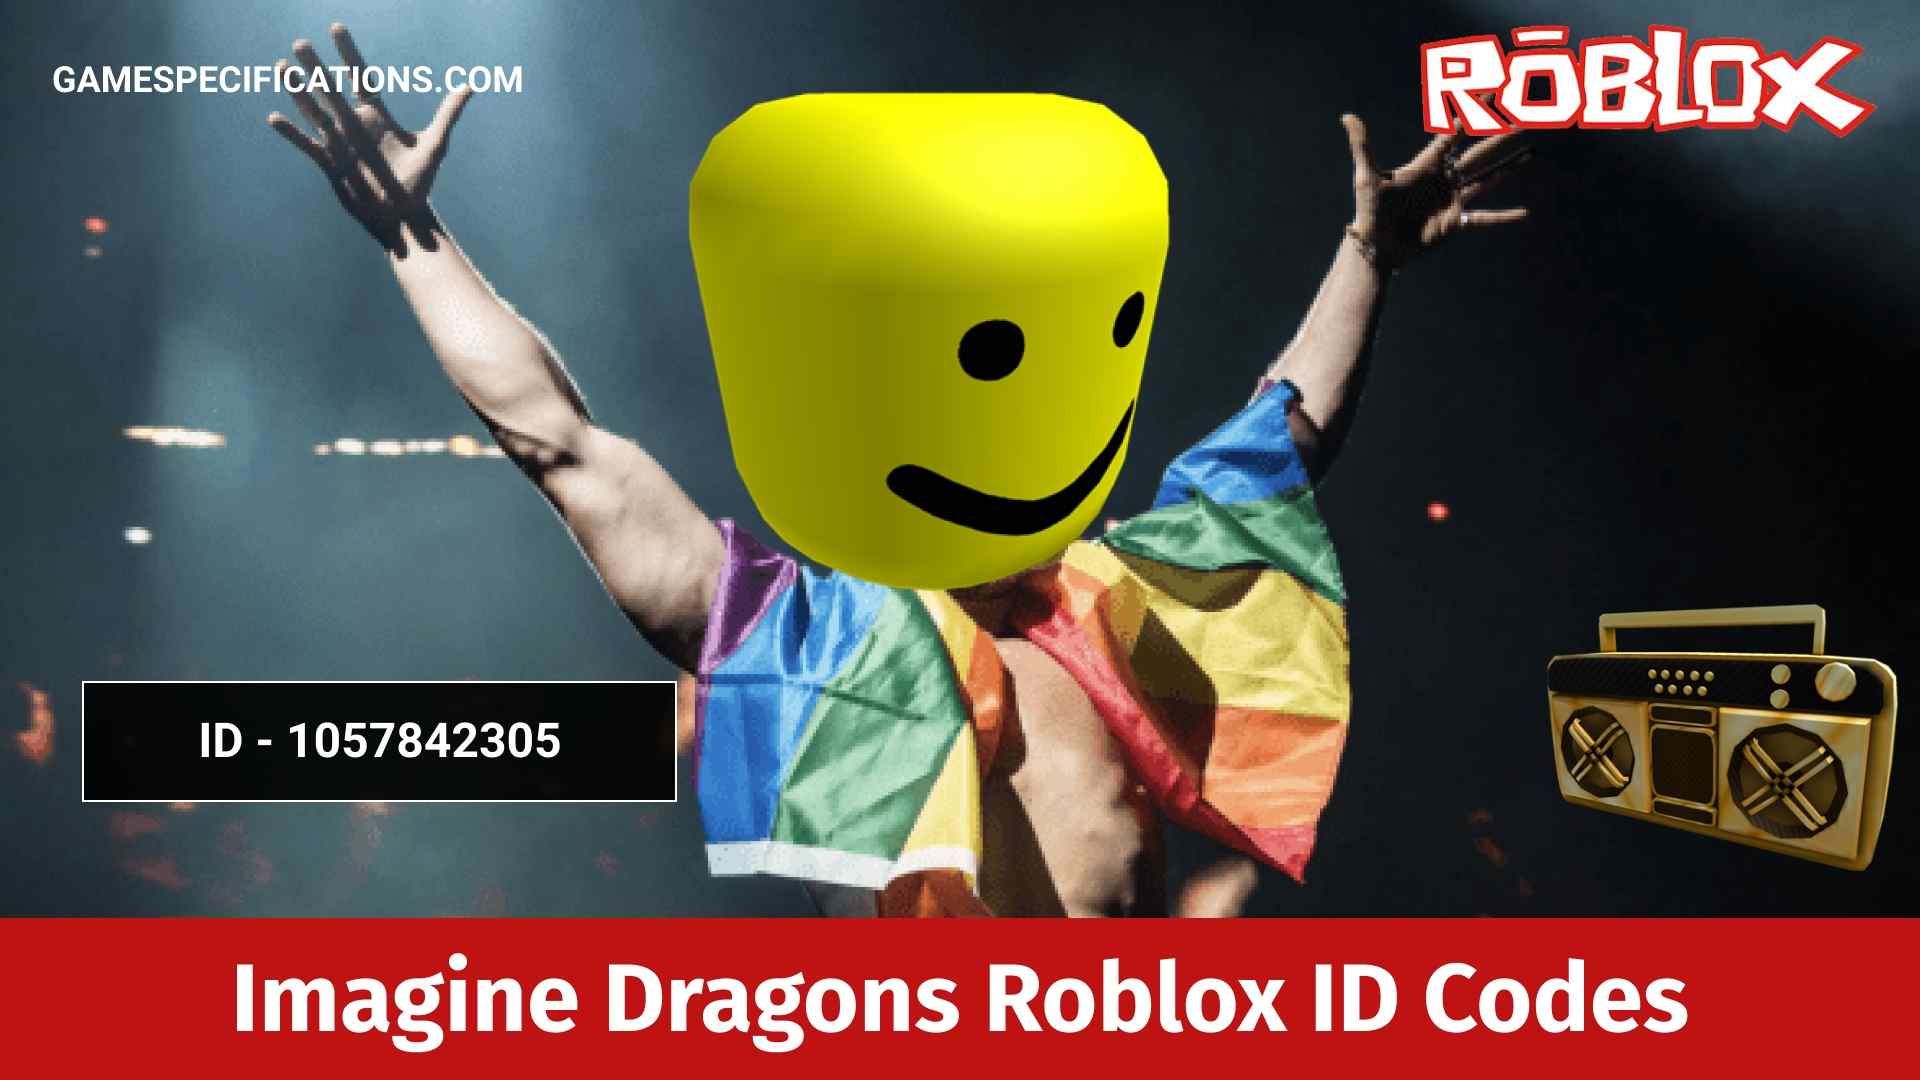 50 Imagine Dragons Roblox Id Codes 2021 Game Specifications - song codes for roblox demons